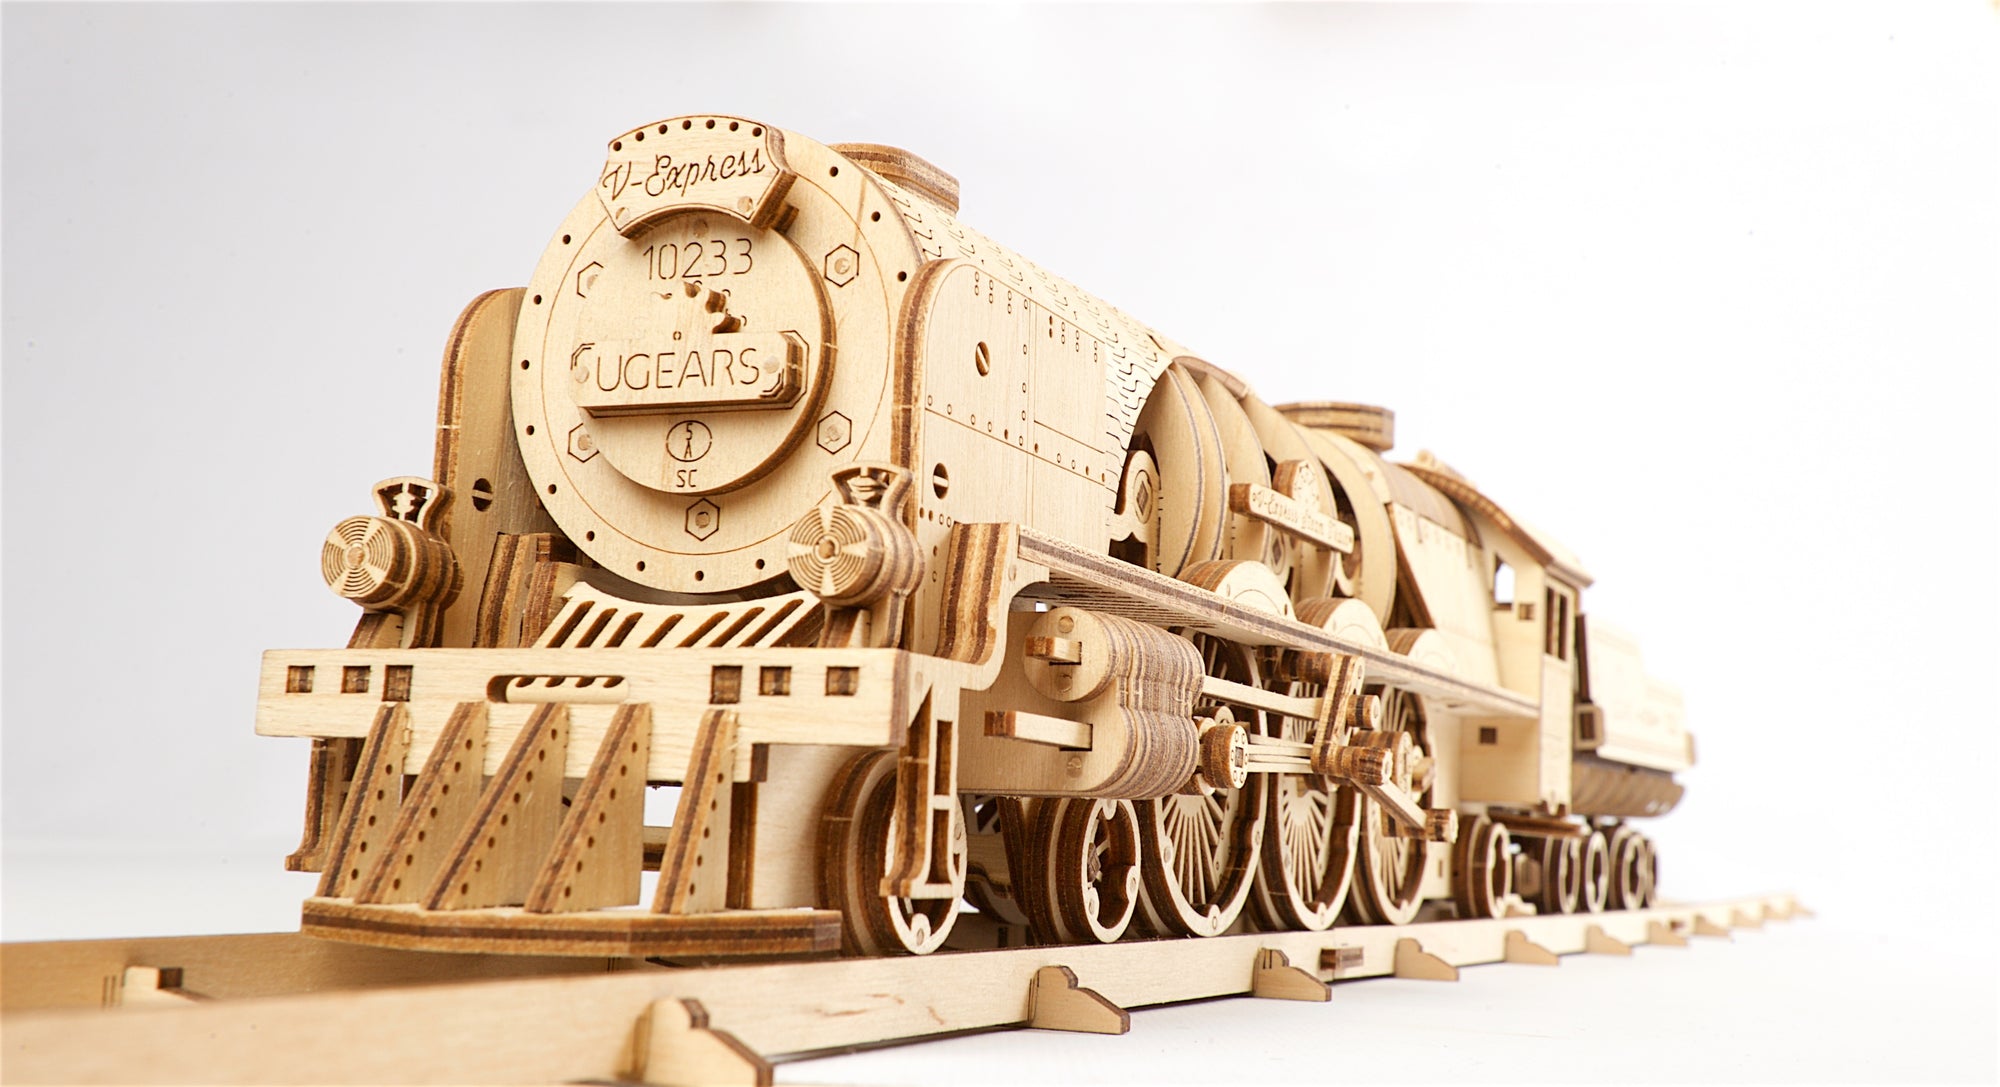 UGears V-Express Steam Train + Tender - Gifts For Dad